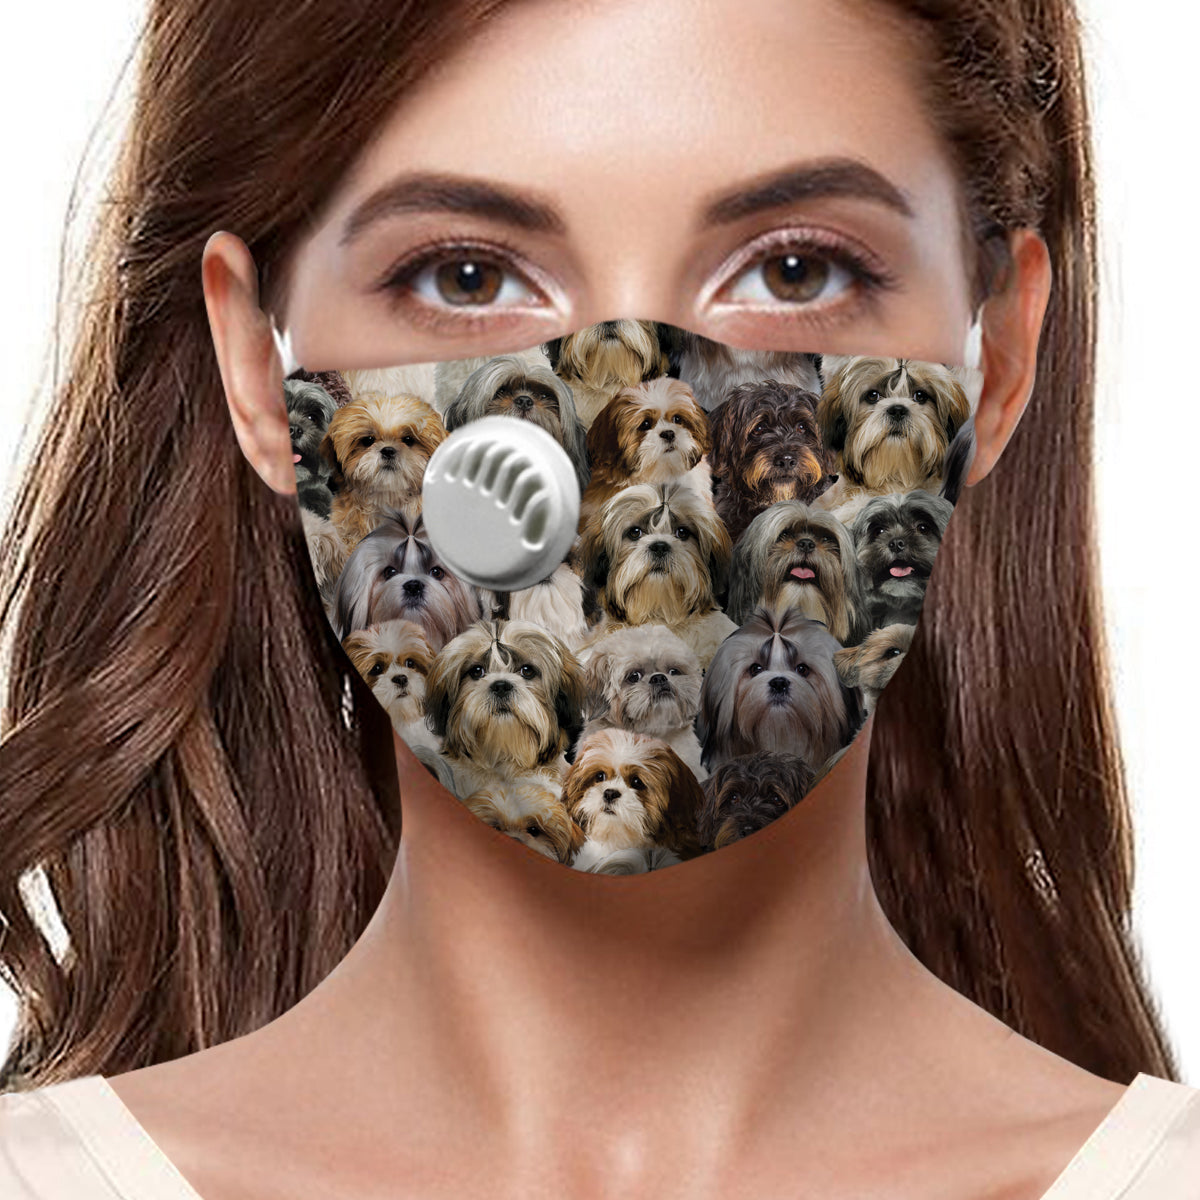 You Will Have A Bunch Of Shih Tzus F-Mask